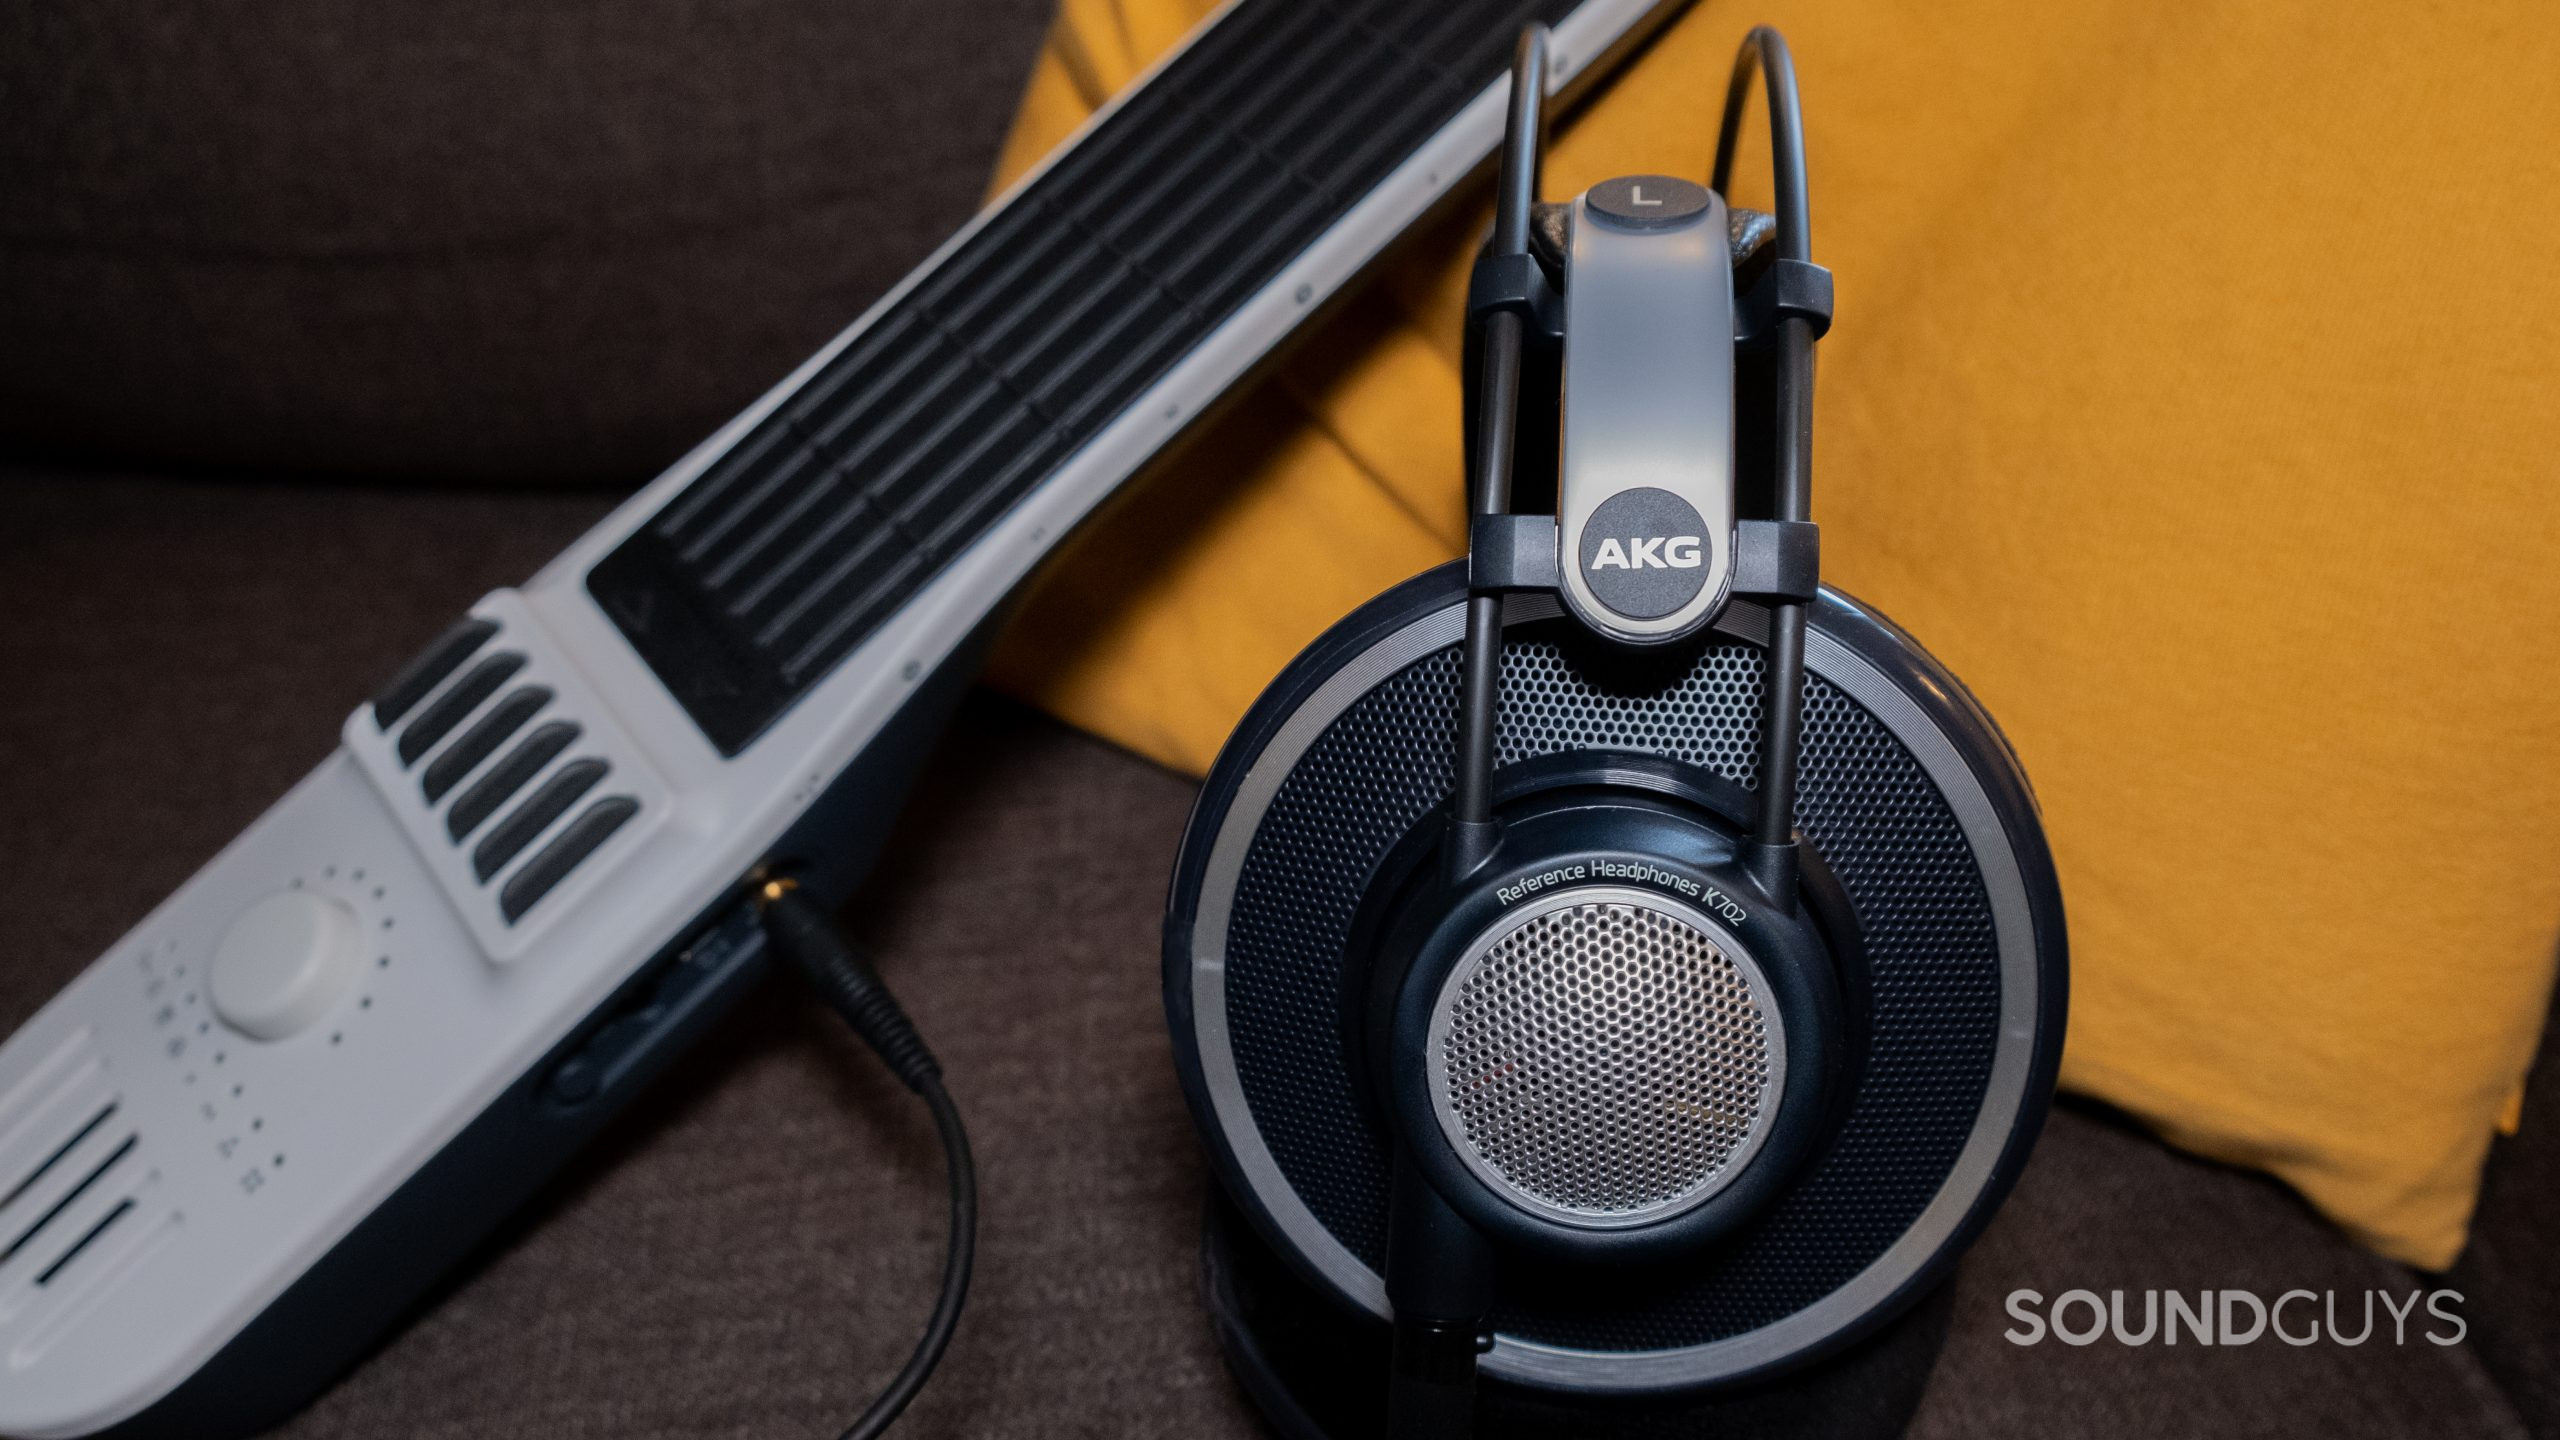 The AKG K702 rests against a yellow pillow next to a midi controller, shown from the side.